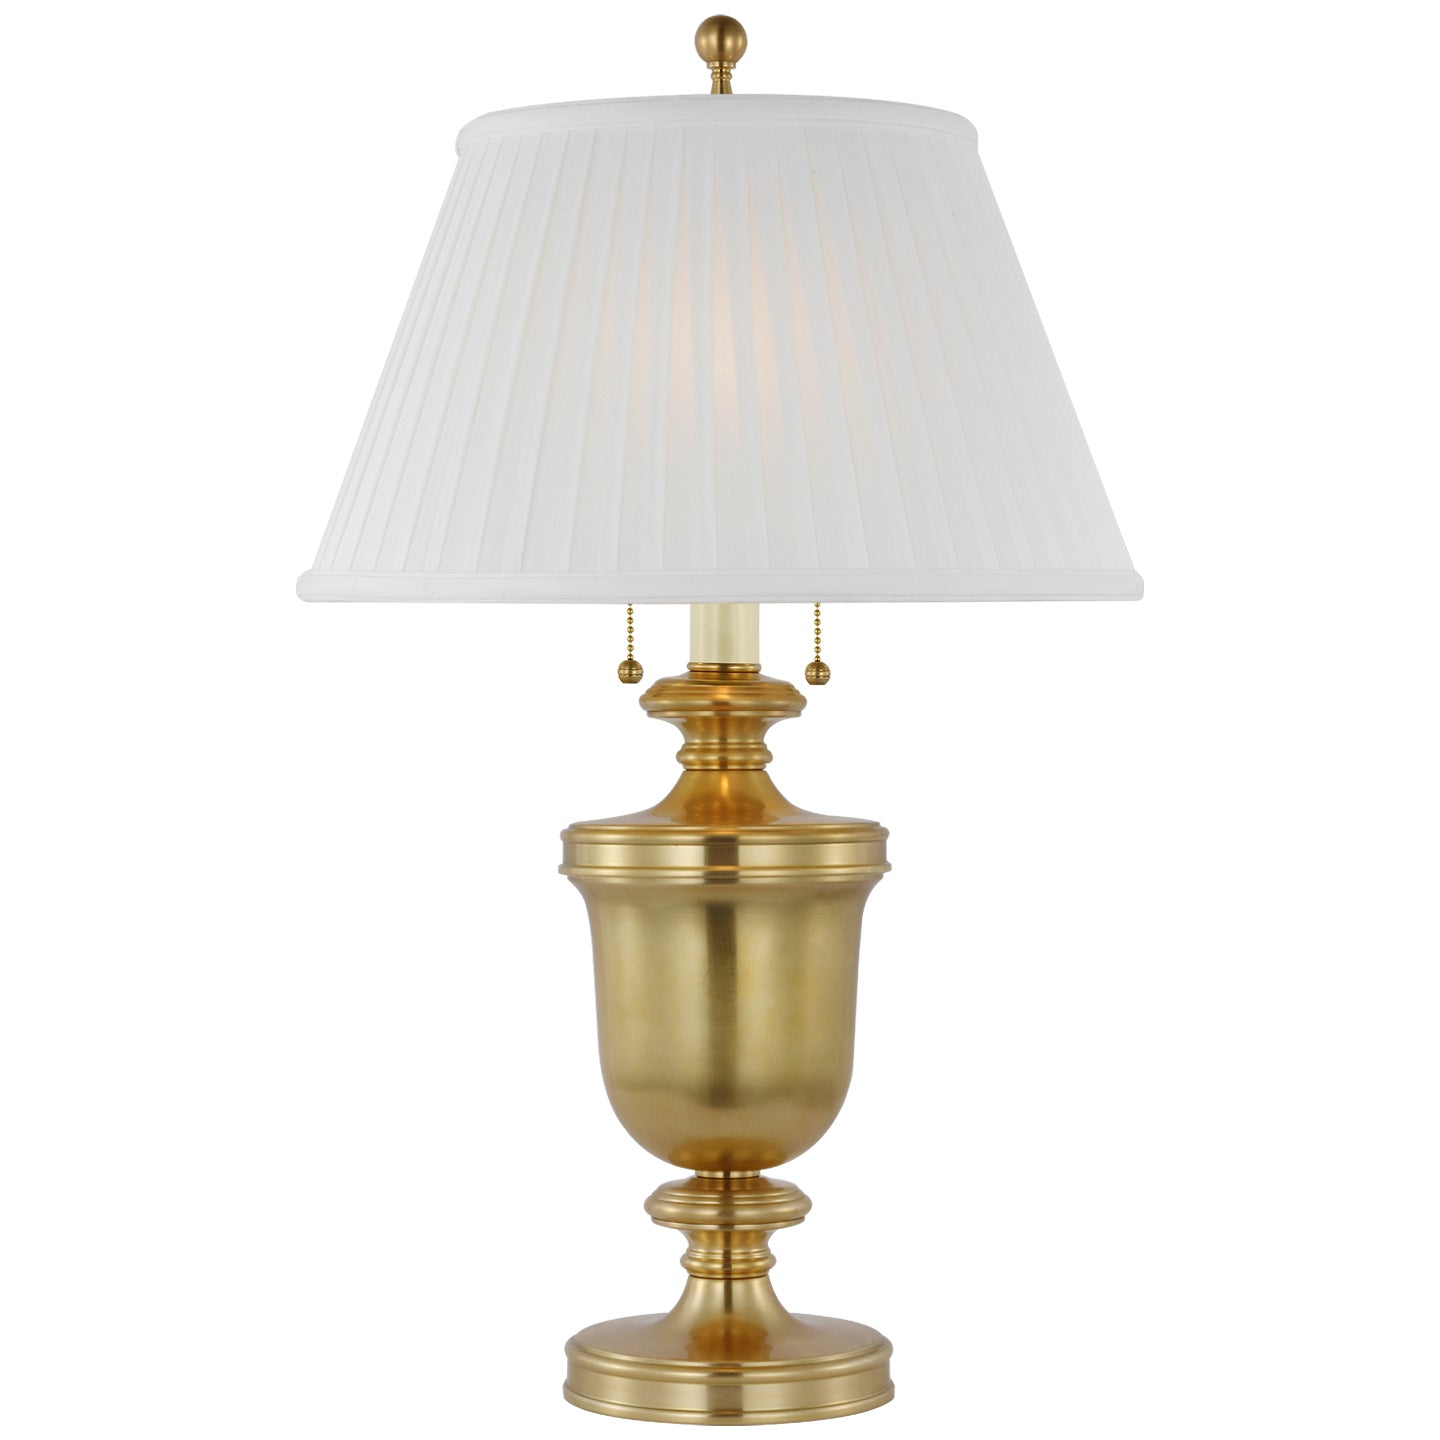 Load image into Gallery viewer, Visual Comfort Signature - CHA 8172AB-SP - Two Light Table Lamp - Classical Urn - Antique-Burnished Brass
